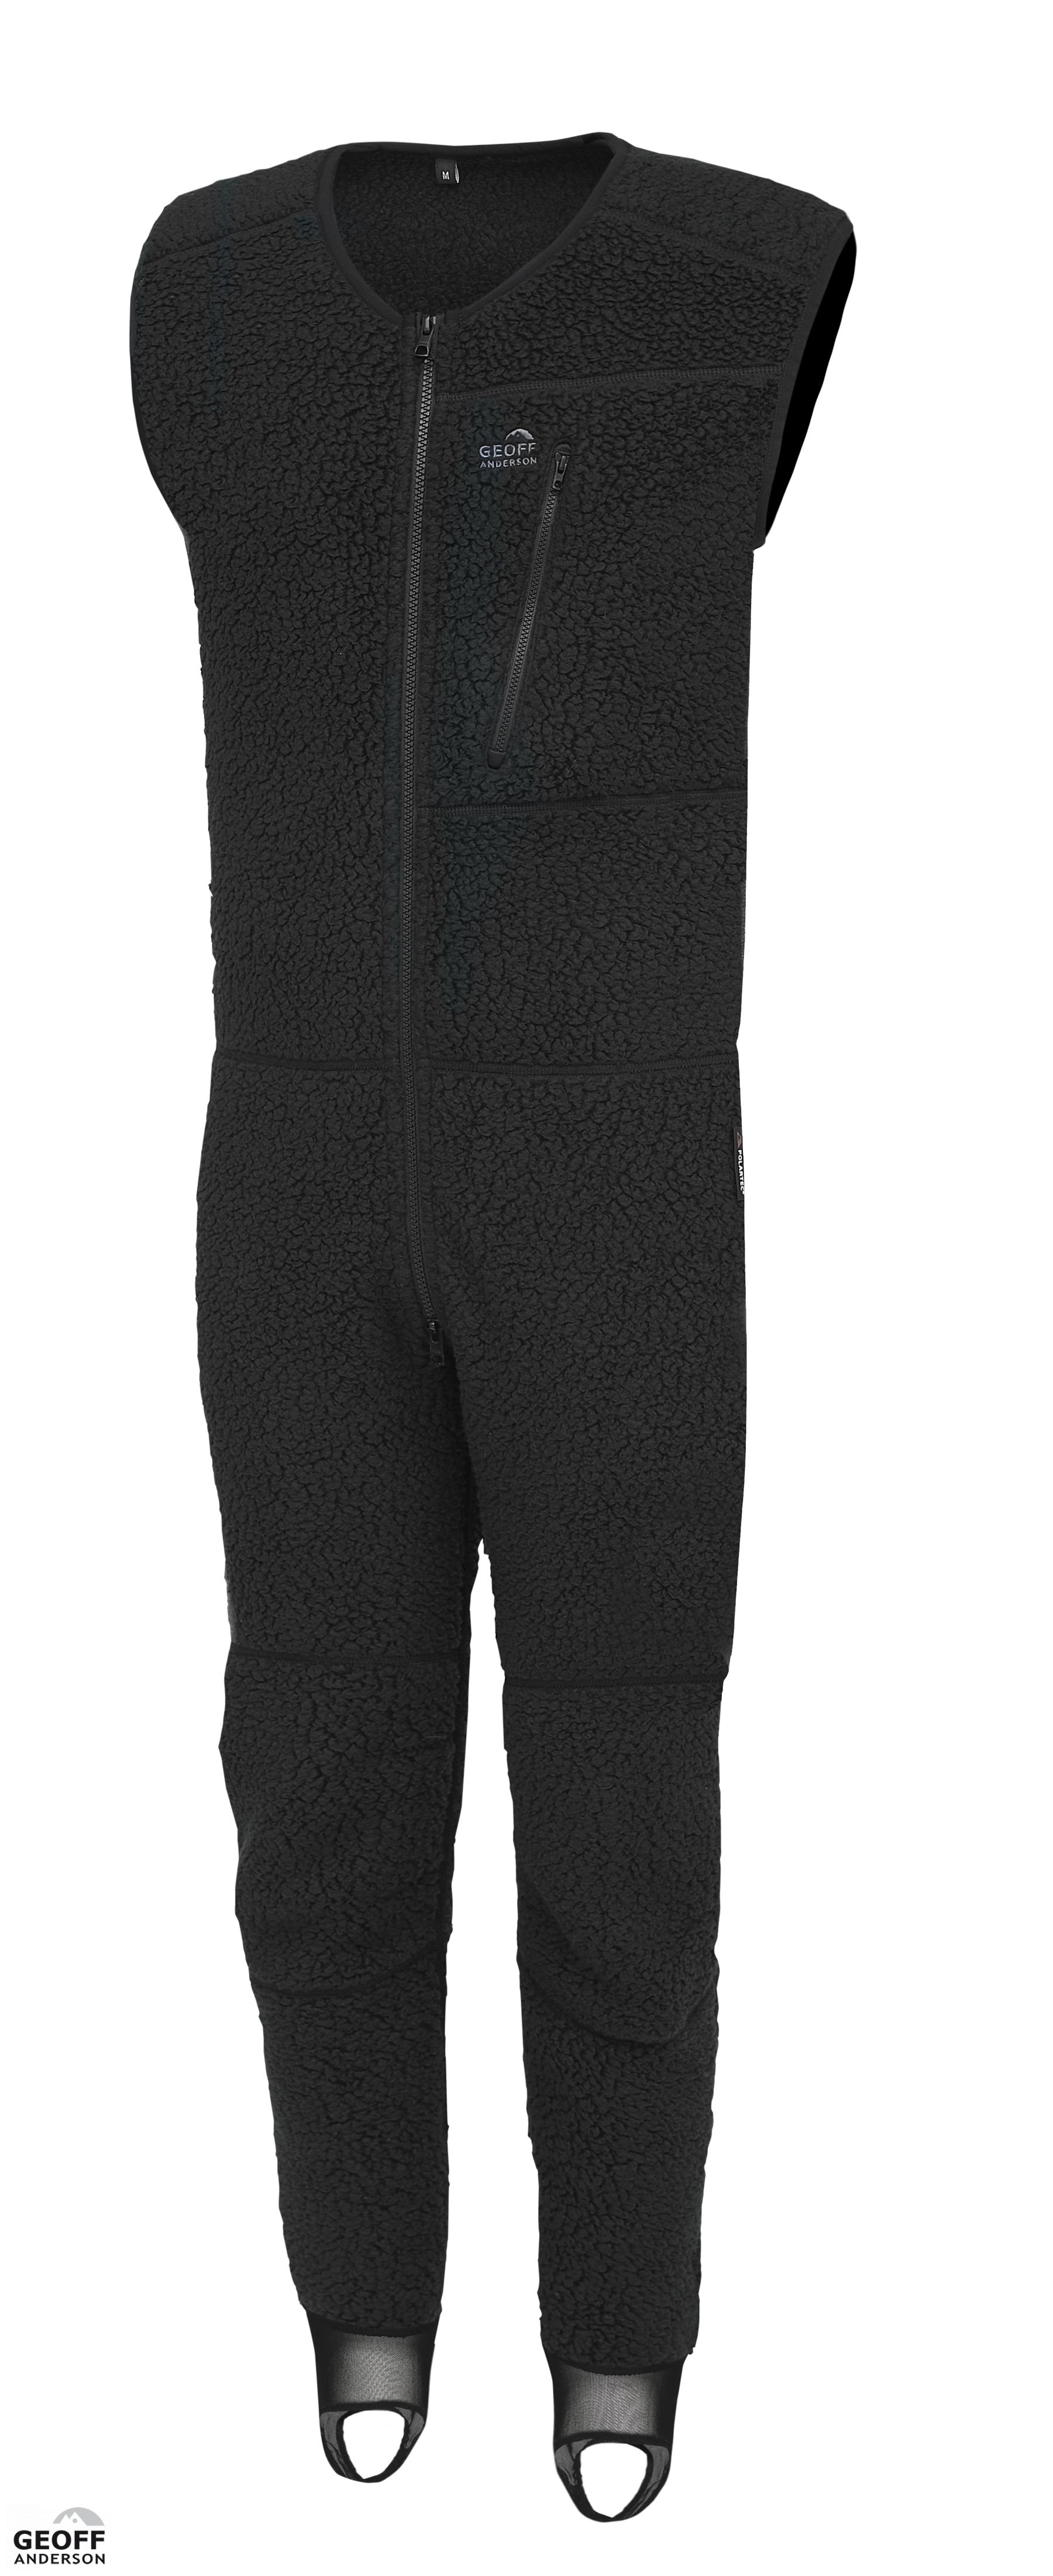 Geoff Anderson Thermal 300 Overall XL